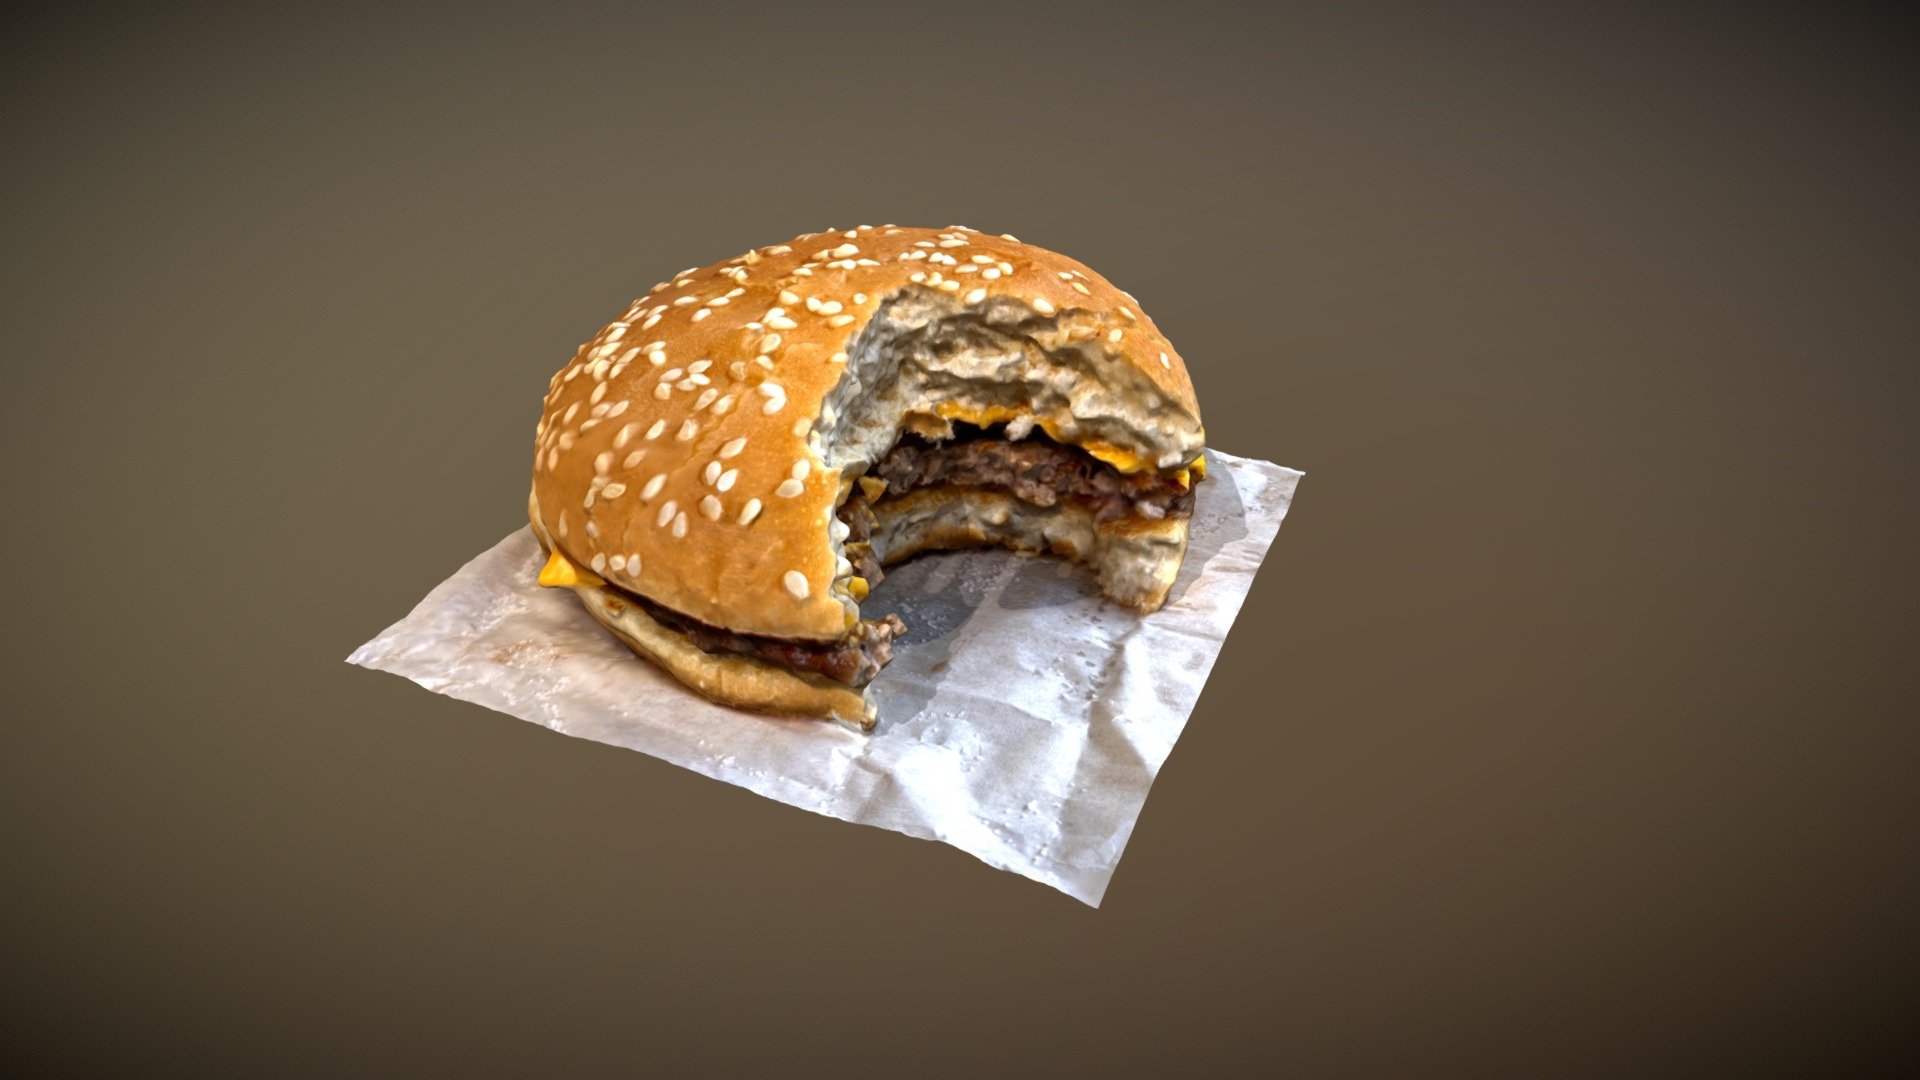 A burger from a fast food chain with a large bite take out of it

Created with Polycam - A burger with a bite taken out of it - Buy Royalty Free 3D model by blackfirefilms 3d model